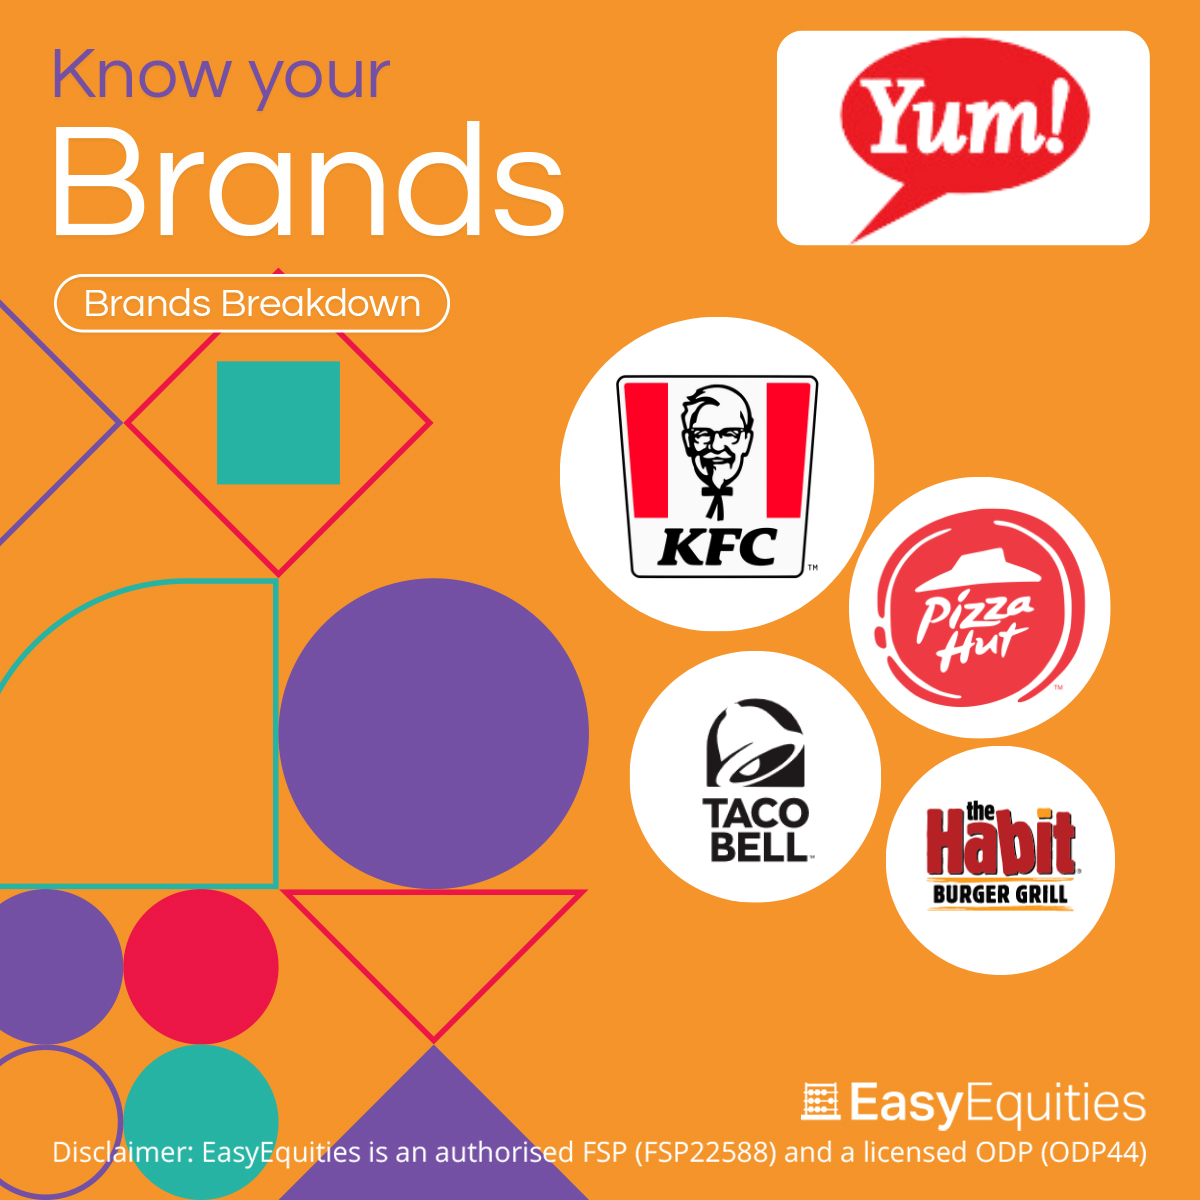 Copy of Know your Brand YUM (1)